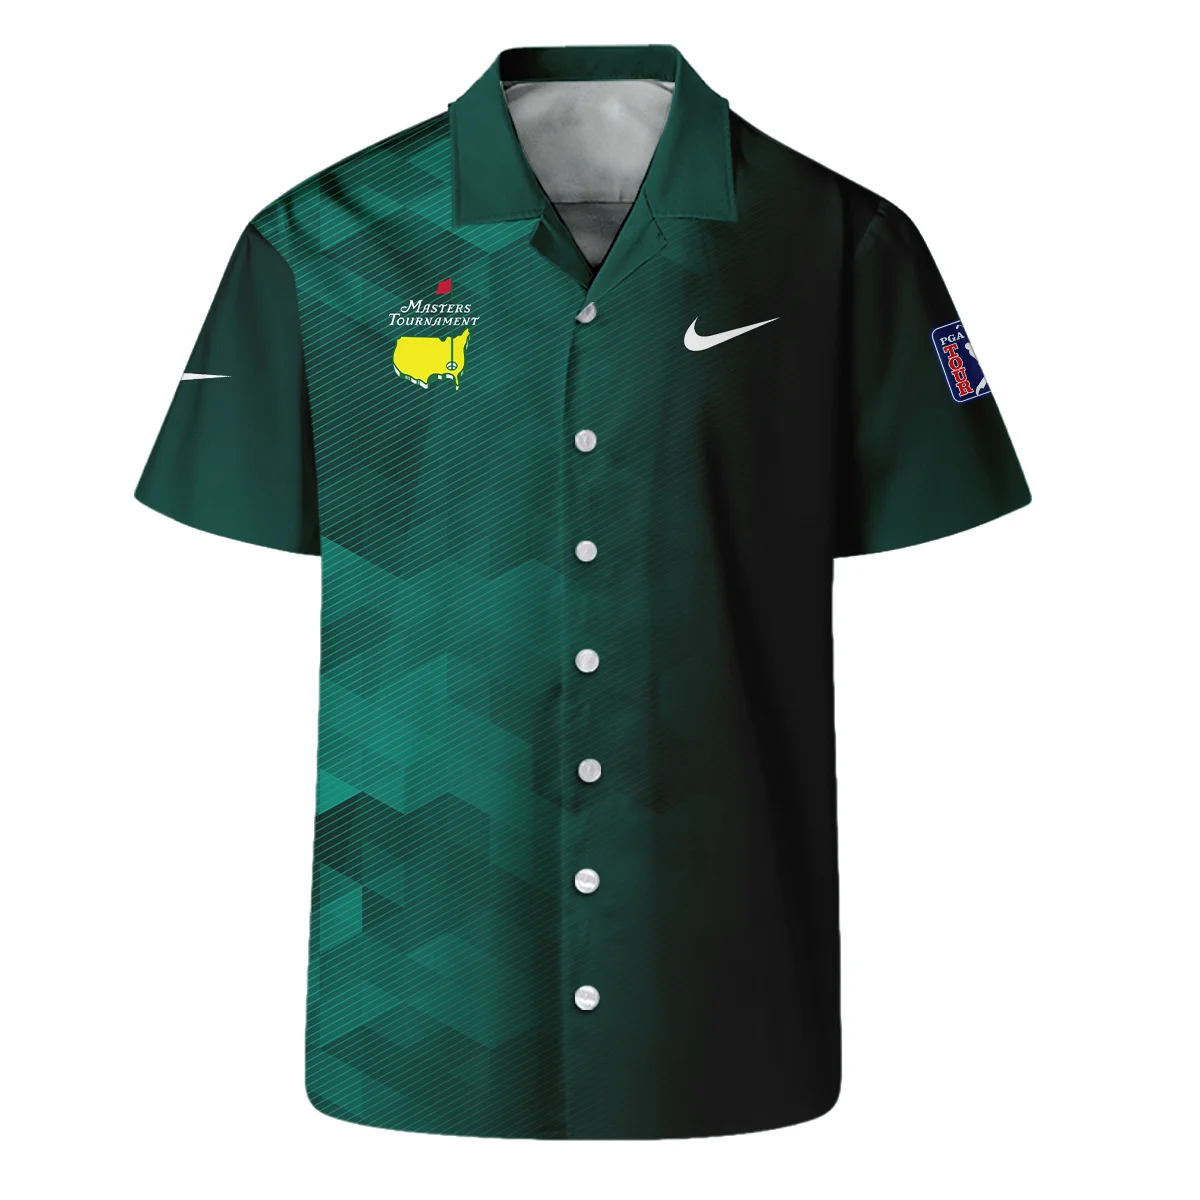 Nike Golf Sport Dark Green Gradient Abstract Background Masters Tournament Vneck Polo Shirt Style Classic Polo Shirt For Men